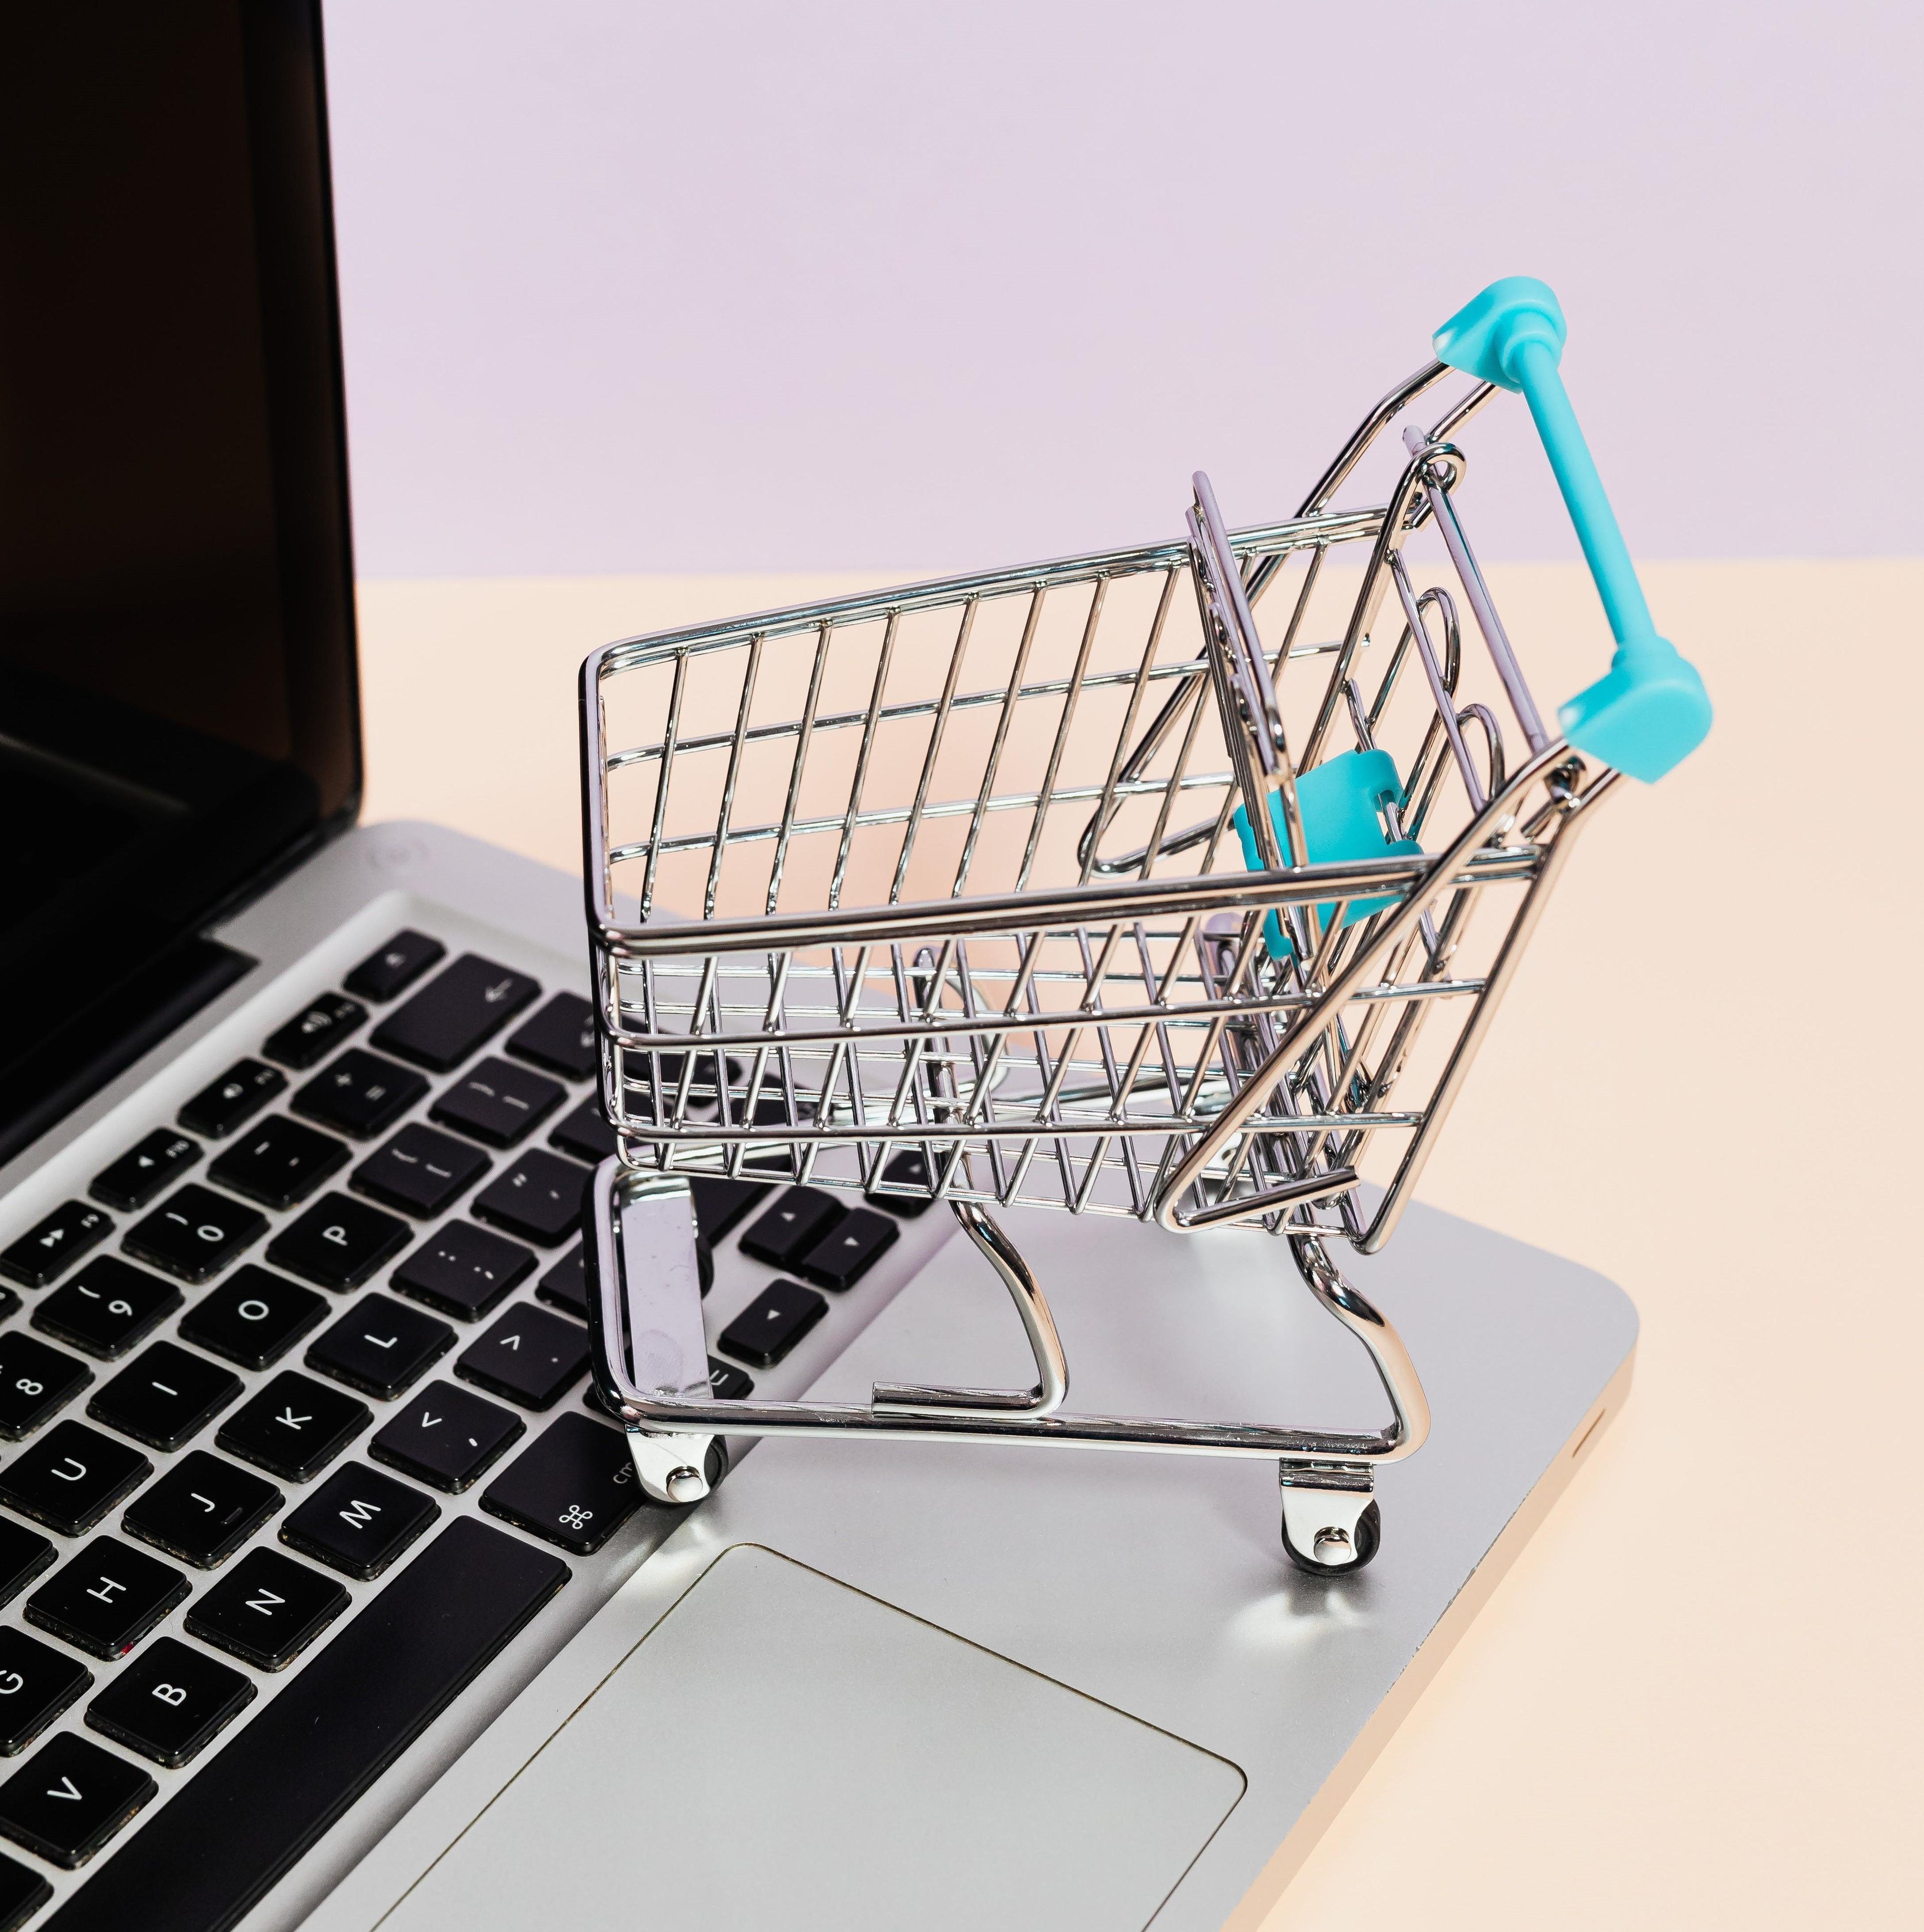 Why Your Business Needs an E-commerce: 4 Key Benefits